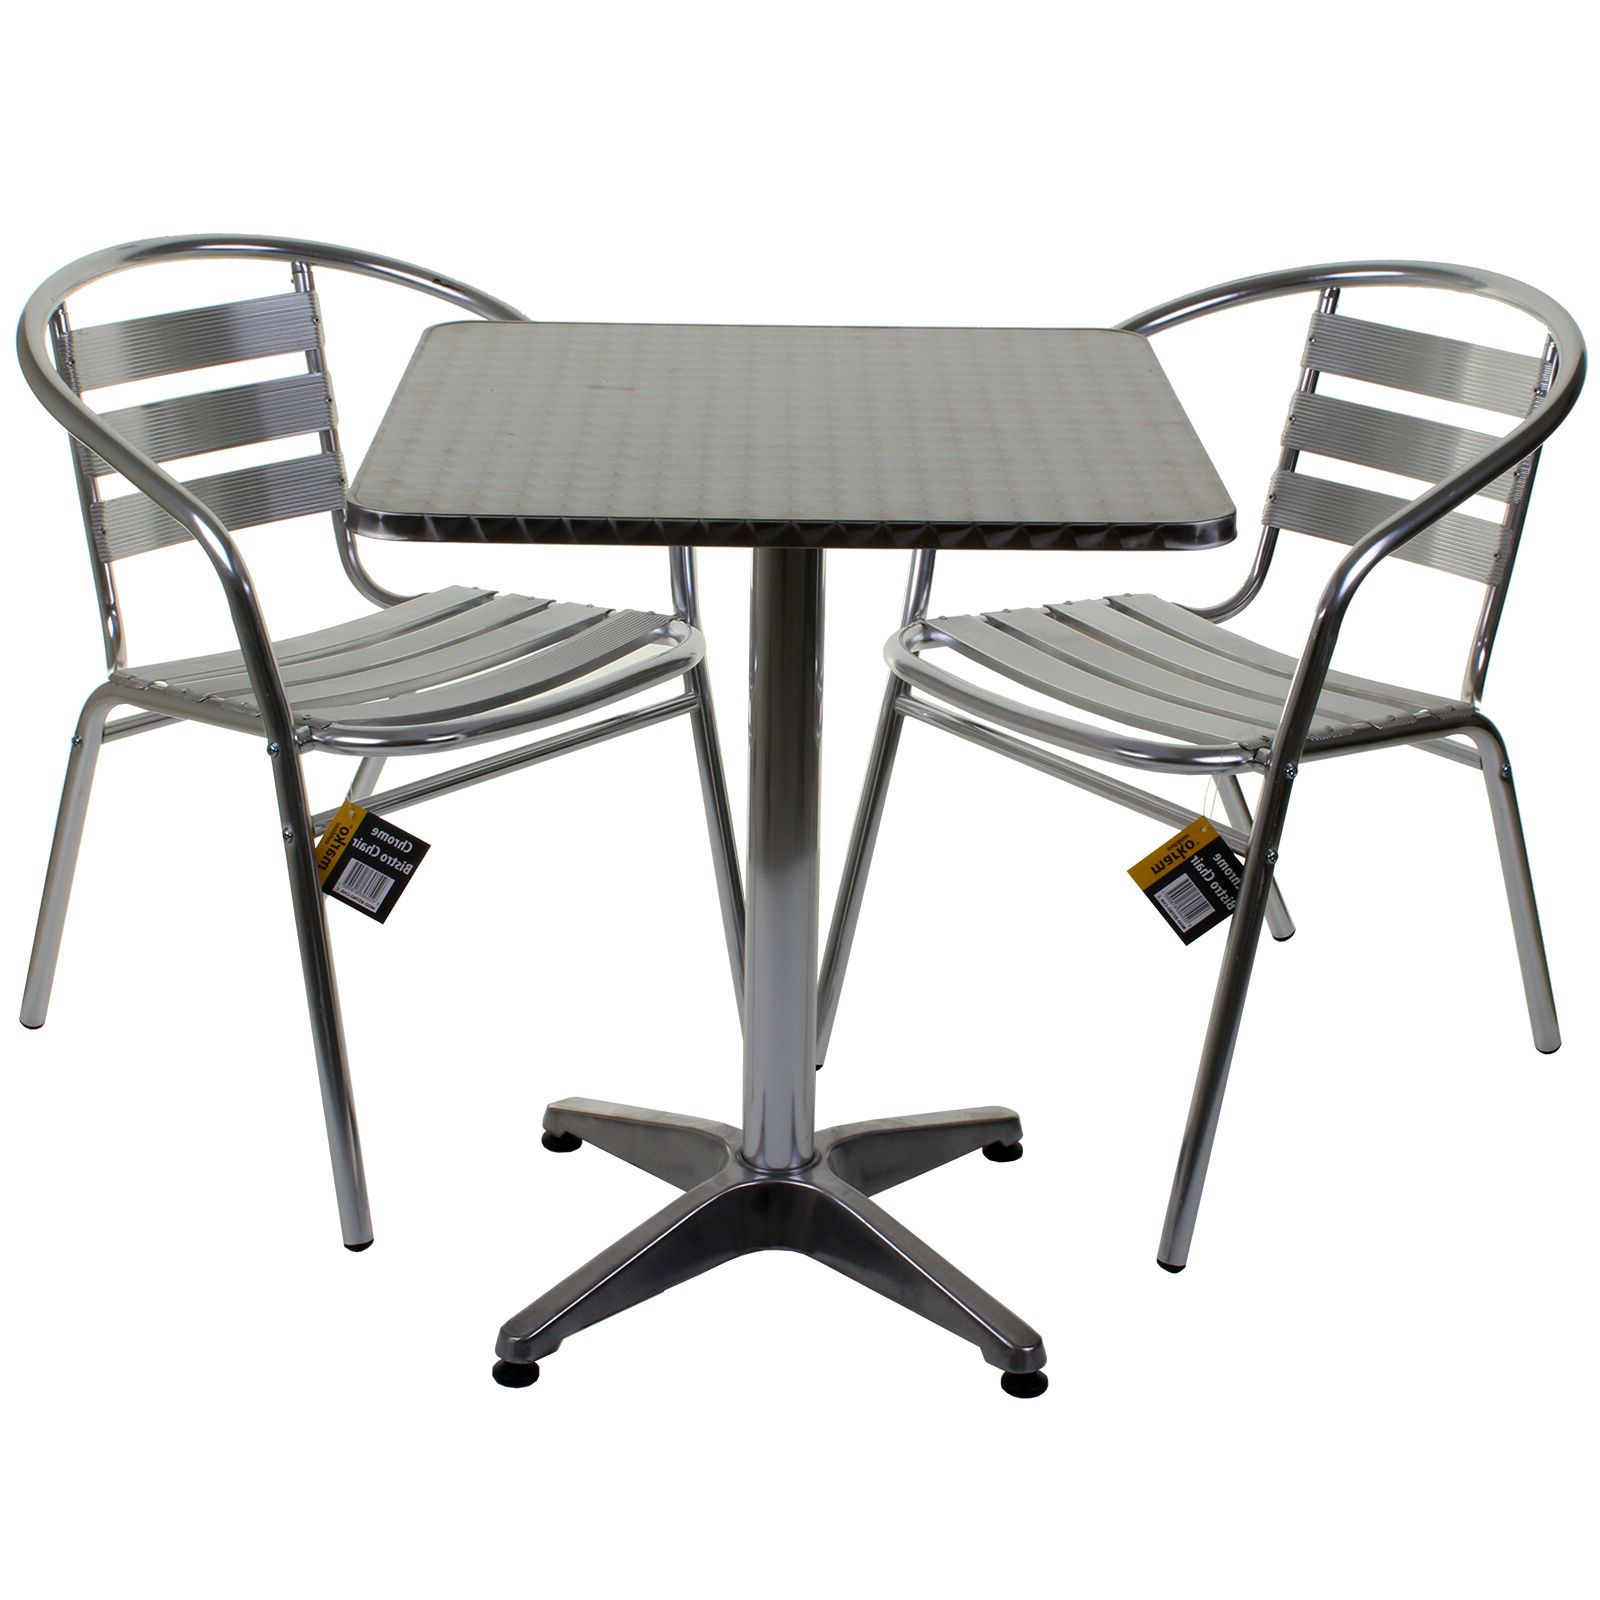 Popular Aluminium Lightweight Chrome Bistro Sets Round Square Tables Stacking  Chairs (View 10 of 15)